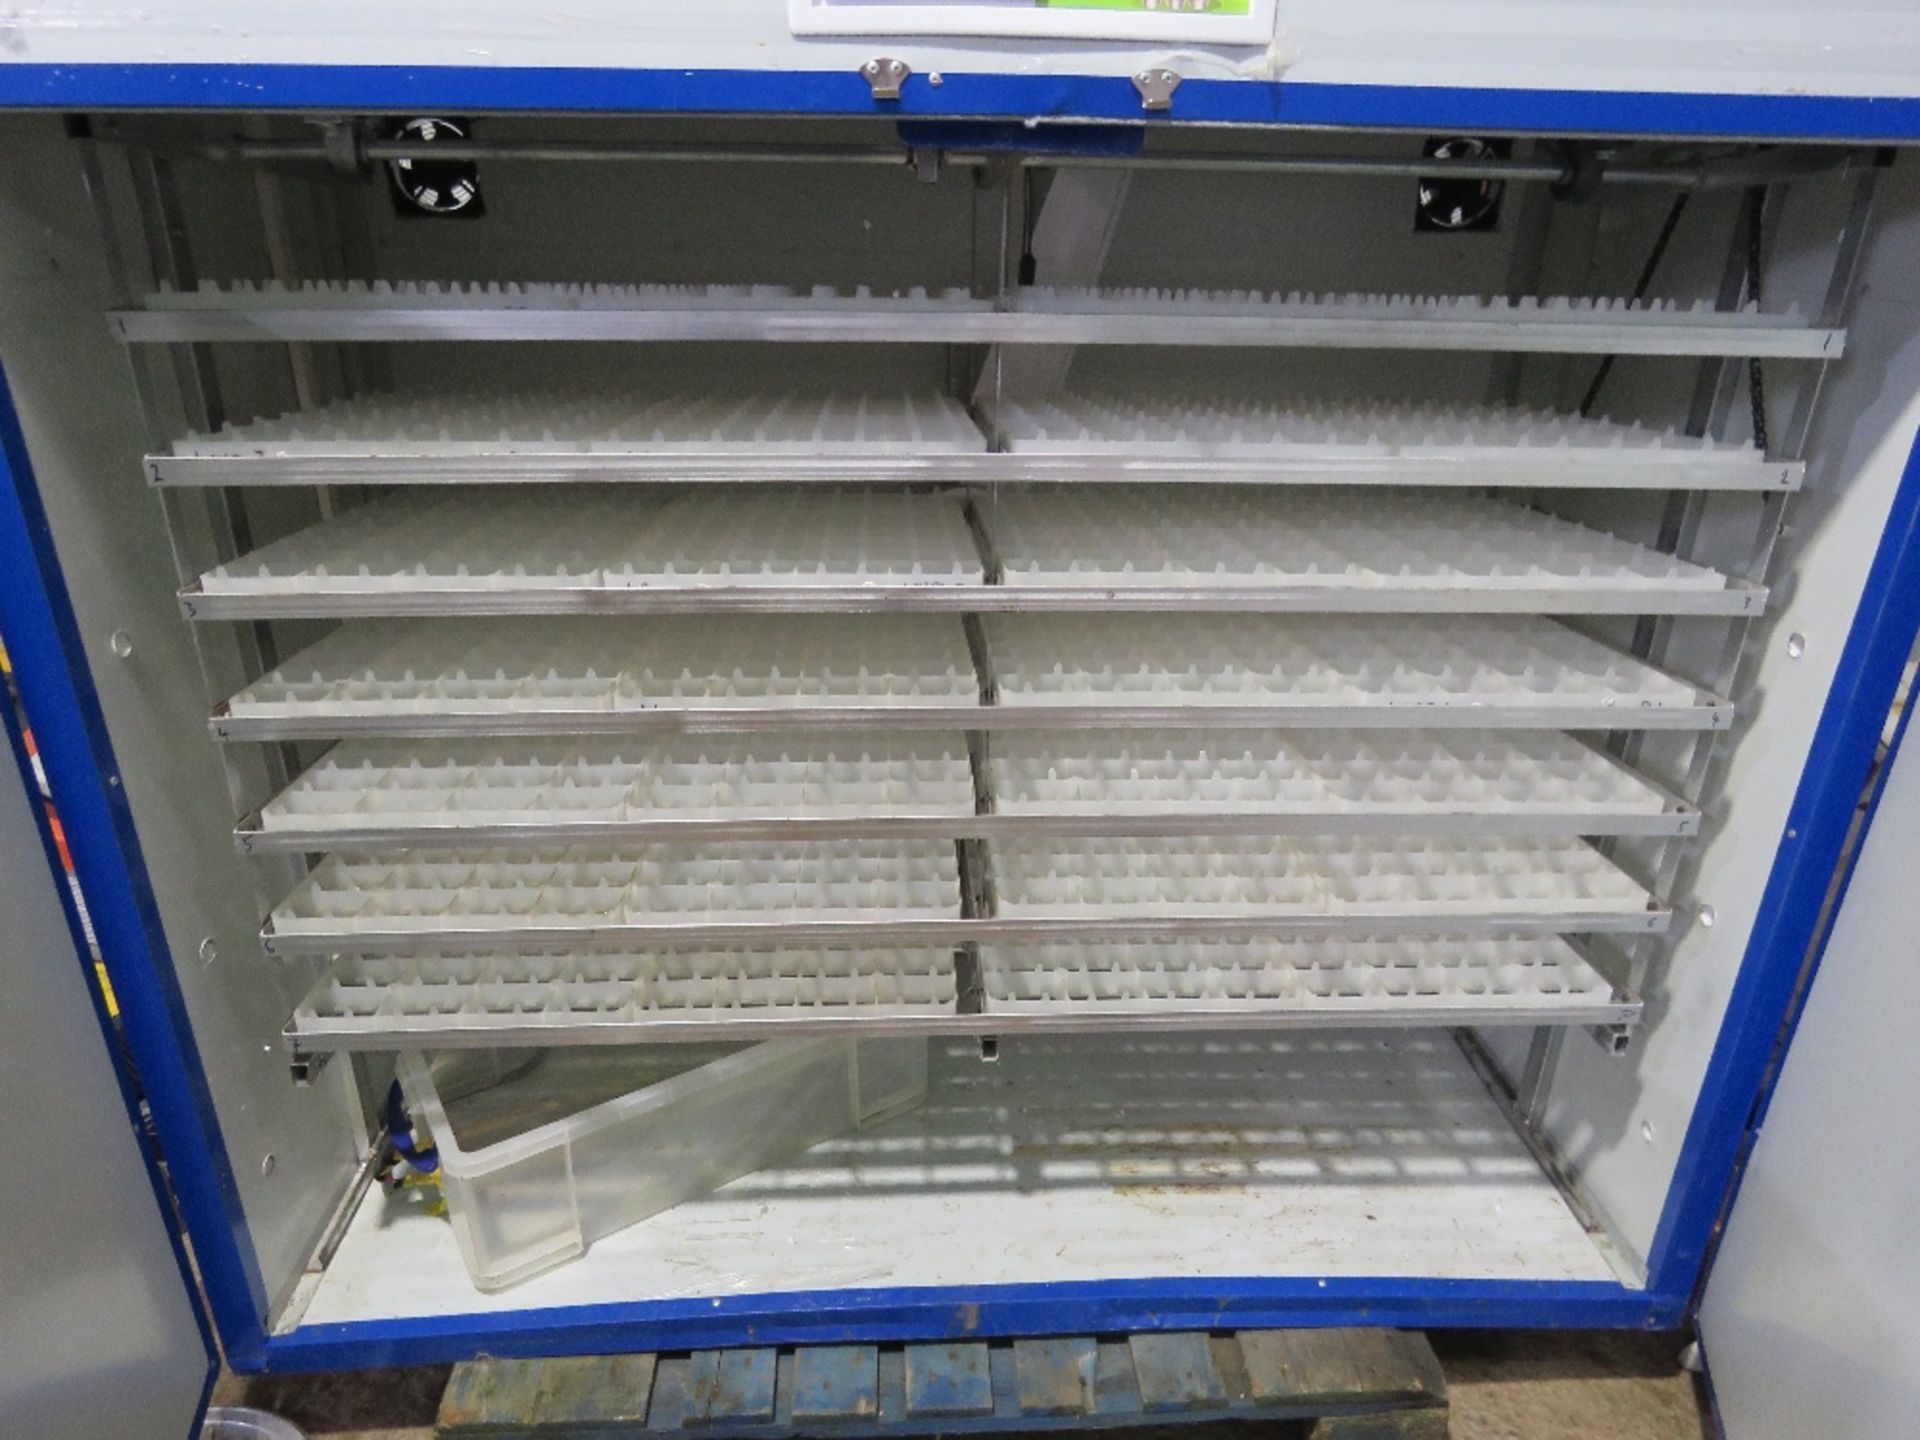 2 DOOR LARGE SIZED EGG INCUBATOR UNIT, 240VOLT POWERED, DIRECT FROM LOCAL POULTRY FARM BEING SURPLUS - Image 6 of 7